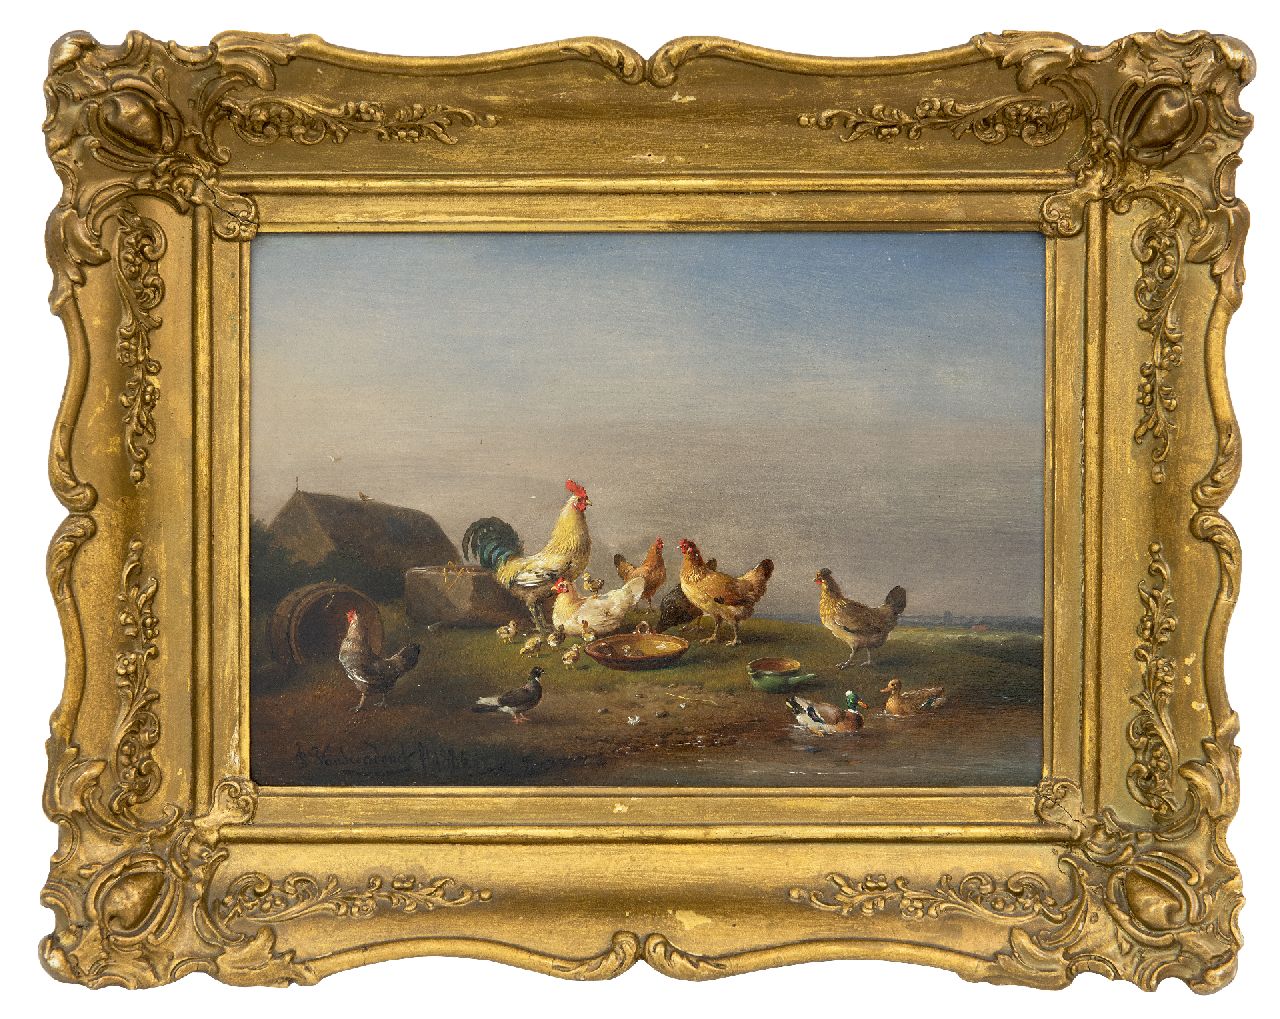 Severdonck F. van | Frans van Severdonck | Paintings offered for sale | Poultry and birds in an extensive landscape, oil on panel 17.8 x 26.0 cm, signed l.l. and painted 1886